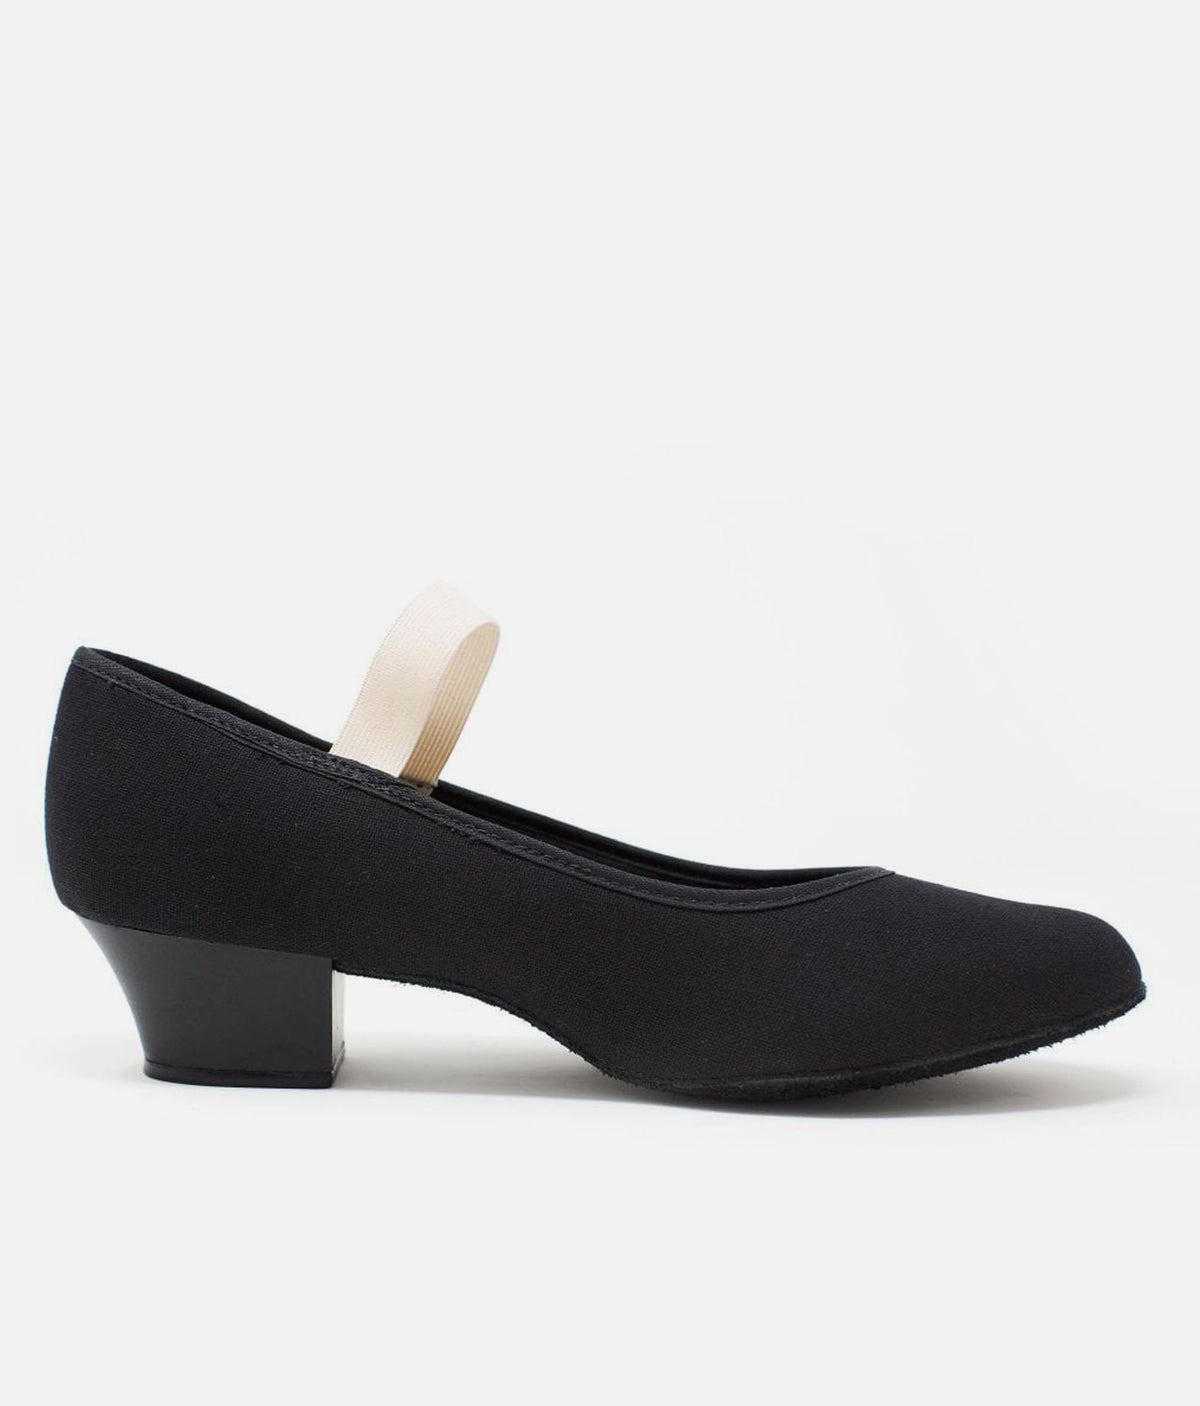 Child's Cuban Heel Character Shoes - RO 14